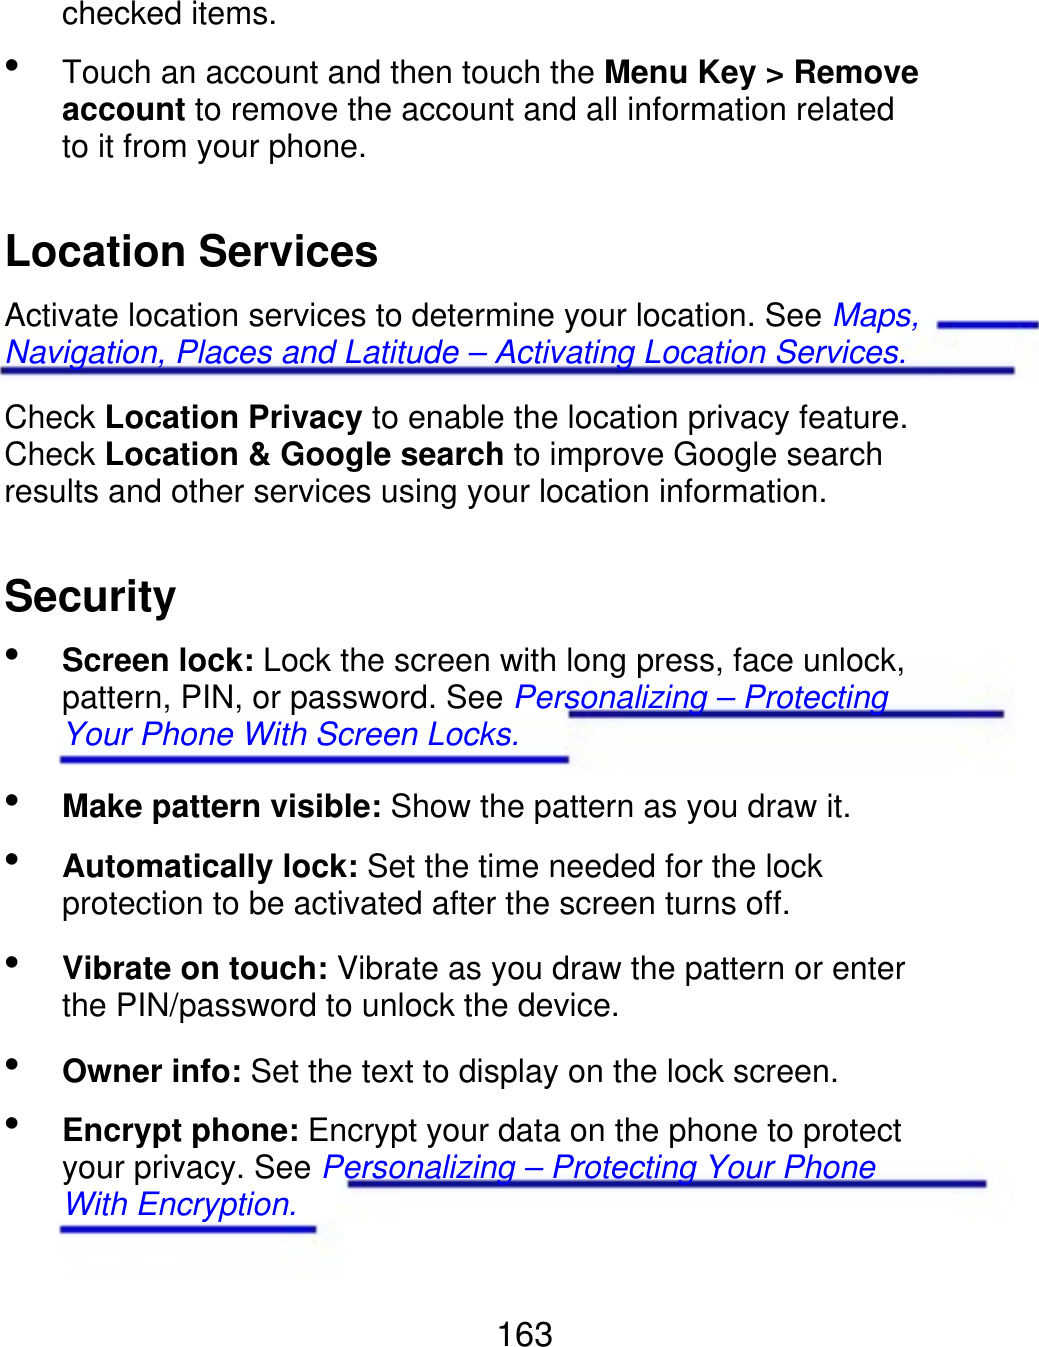 checked items.  Touch an account and then touch the Menu Key &gt; Remove account to remove the account and all information related to it from your phone. Location Services Activate location services to determine your location. See Maps, Navigation, Places and Latitude – Activating Location Services. Check Location Privacy to enable the location privacy feature. Check Location &amp; Google search to improve Google search results and other services using your location information. Security  Screen lock: Lock the screen with long press, face unlock, pattern, PIN, or password. See Personalizing – Protecting Your Phone With Screen Locks. Make pattern visible: Show the pattern as you draw it. Automatically lock: Set the time needed for the lock protection to be activated after the screen turns off. Vibrate on touch: Vibrate as you draw the pattern or enter the PIN/password to unlock the device. Owner info: Set the text to display on the lock screen. Encrypt phone: Encrypt your data on the phone to protect your privacy. See Personalizing – Protecting Your Phone With Encryption.      163 